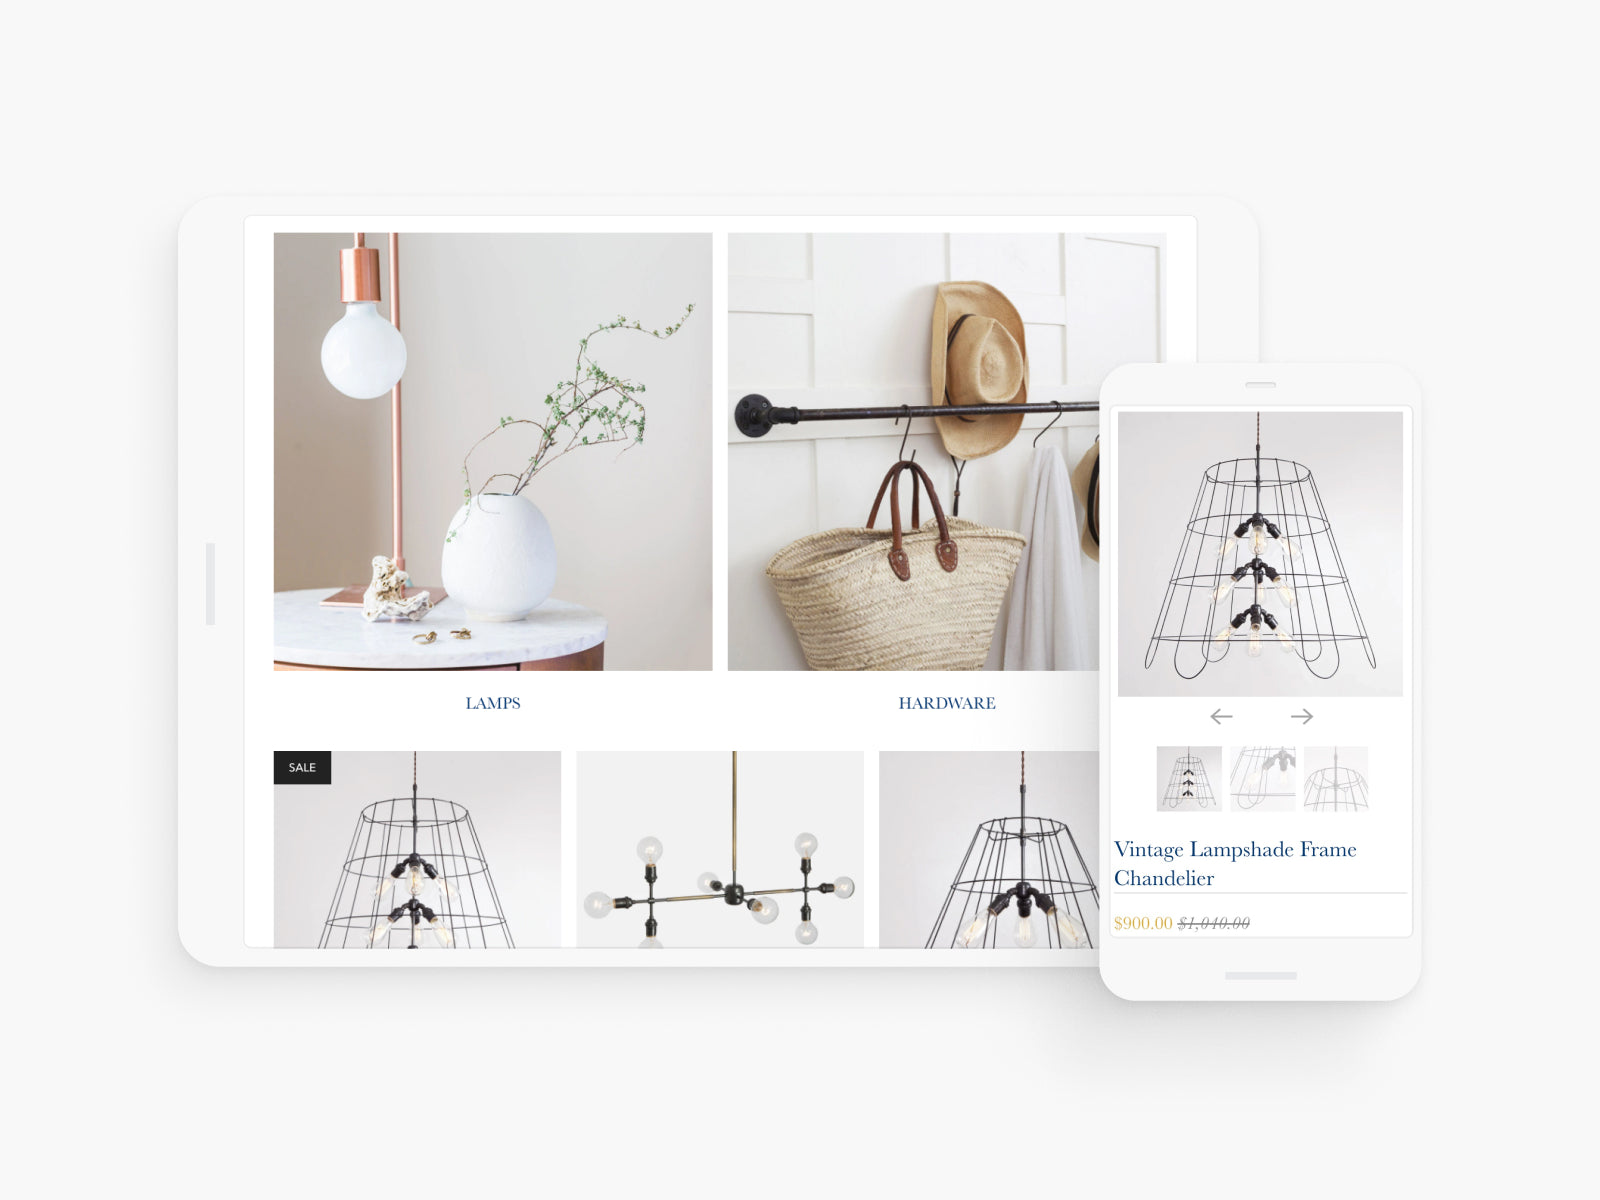 lamp products displayed on desktop and mobile devices